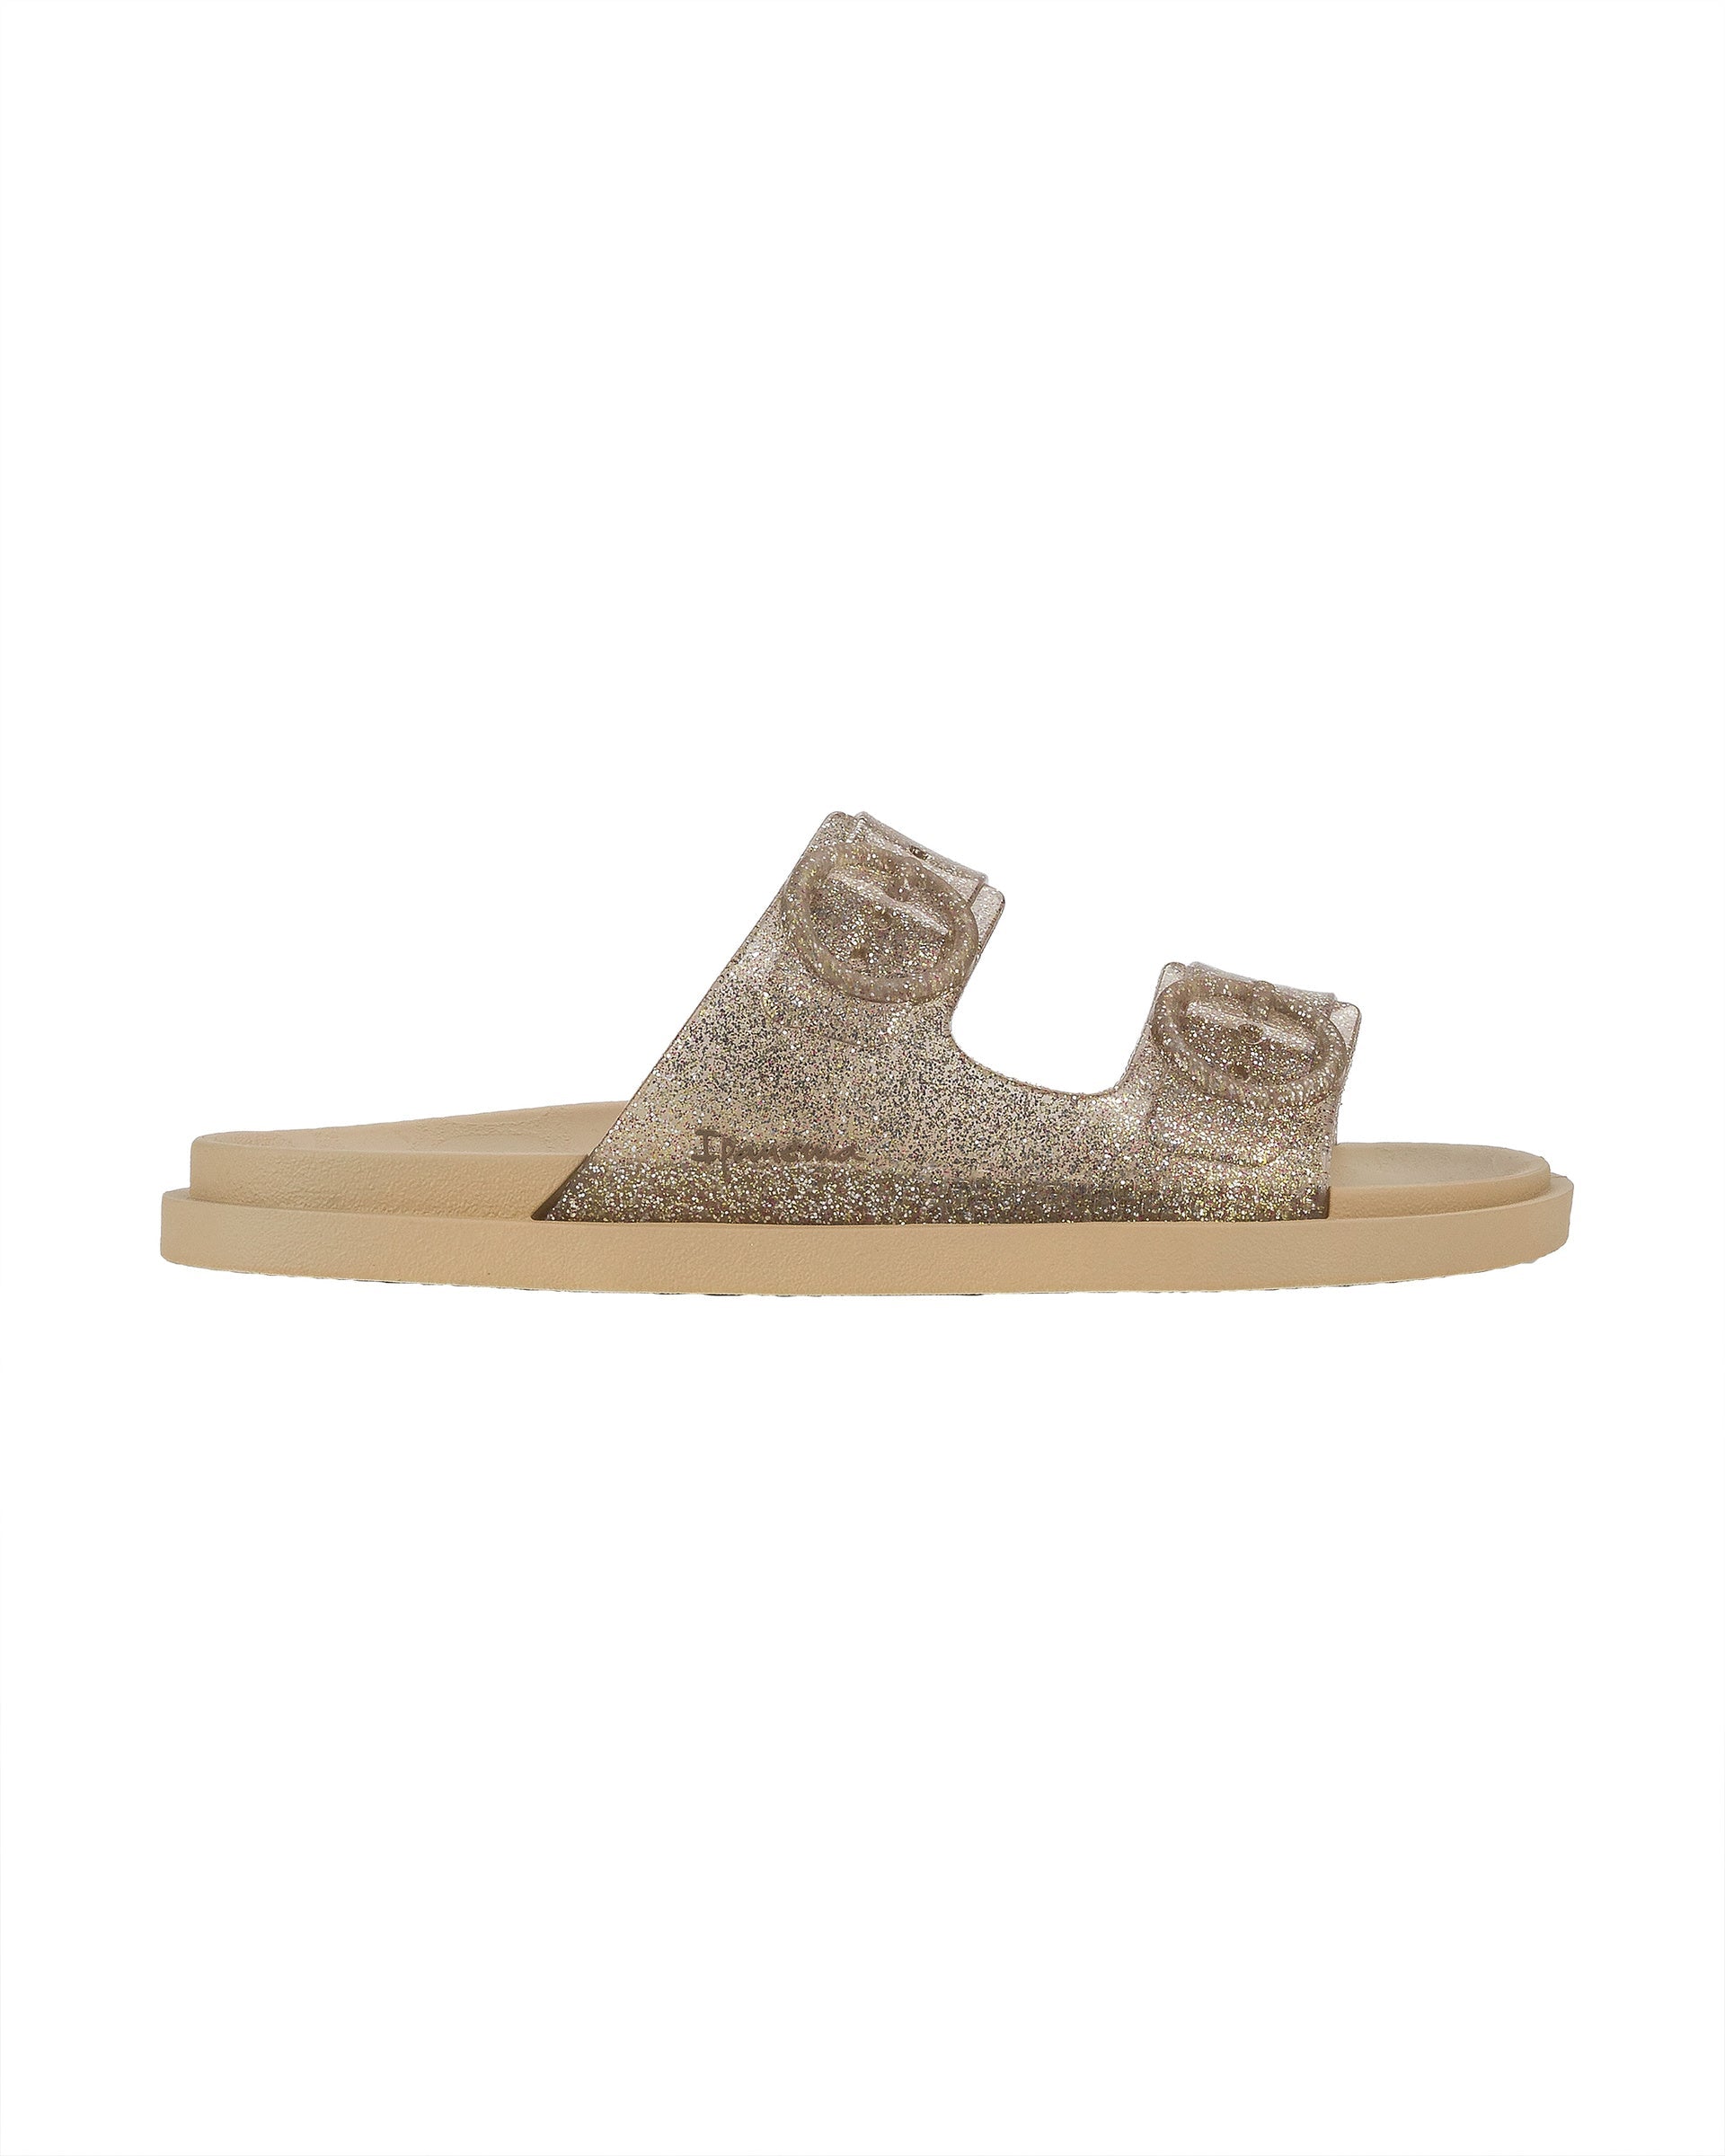 Outer side view of a beige Ipanema Follow kids slide with a glitter upper.